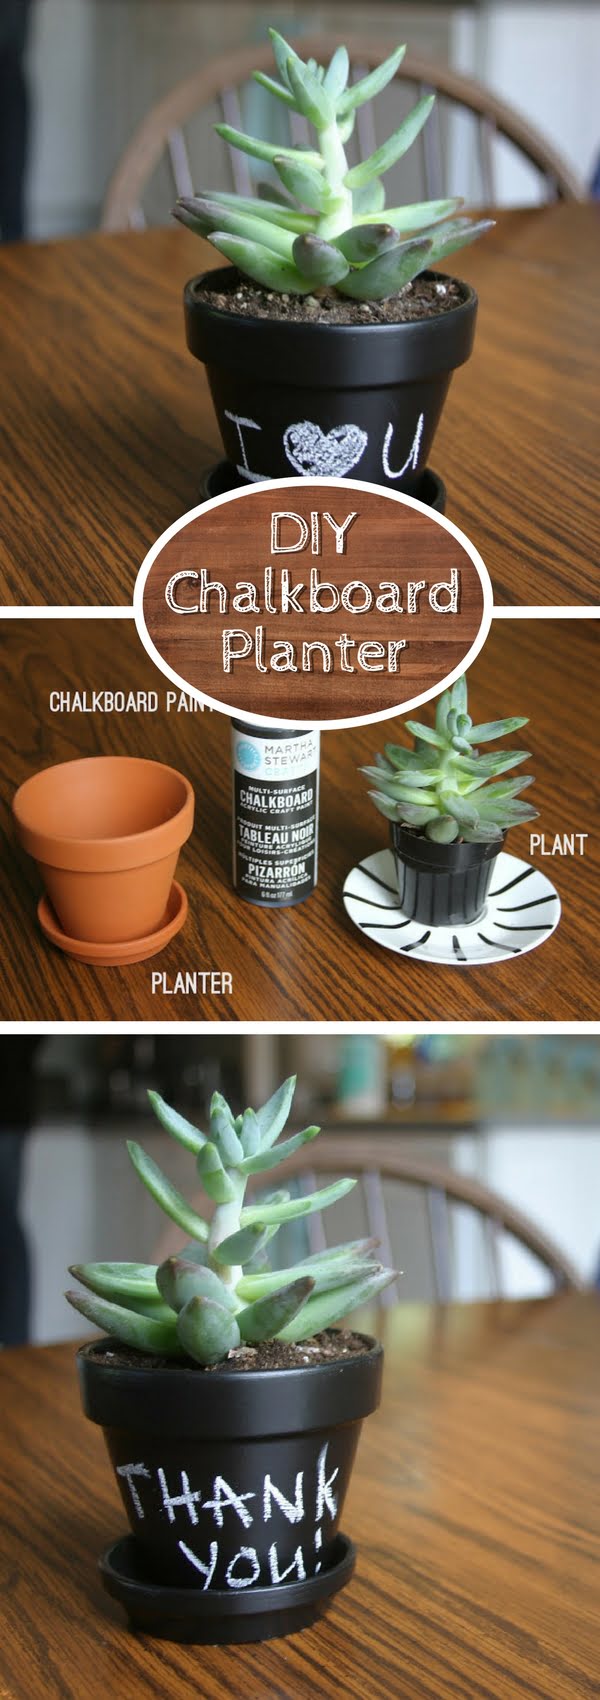 Check out how to make a DIY chalkboard planter